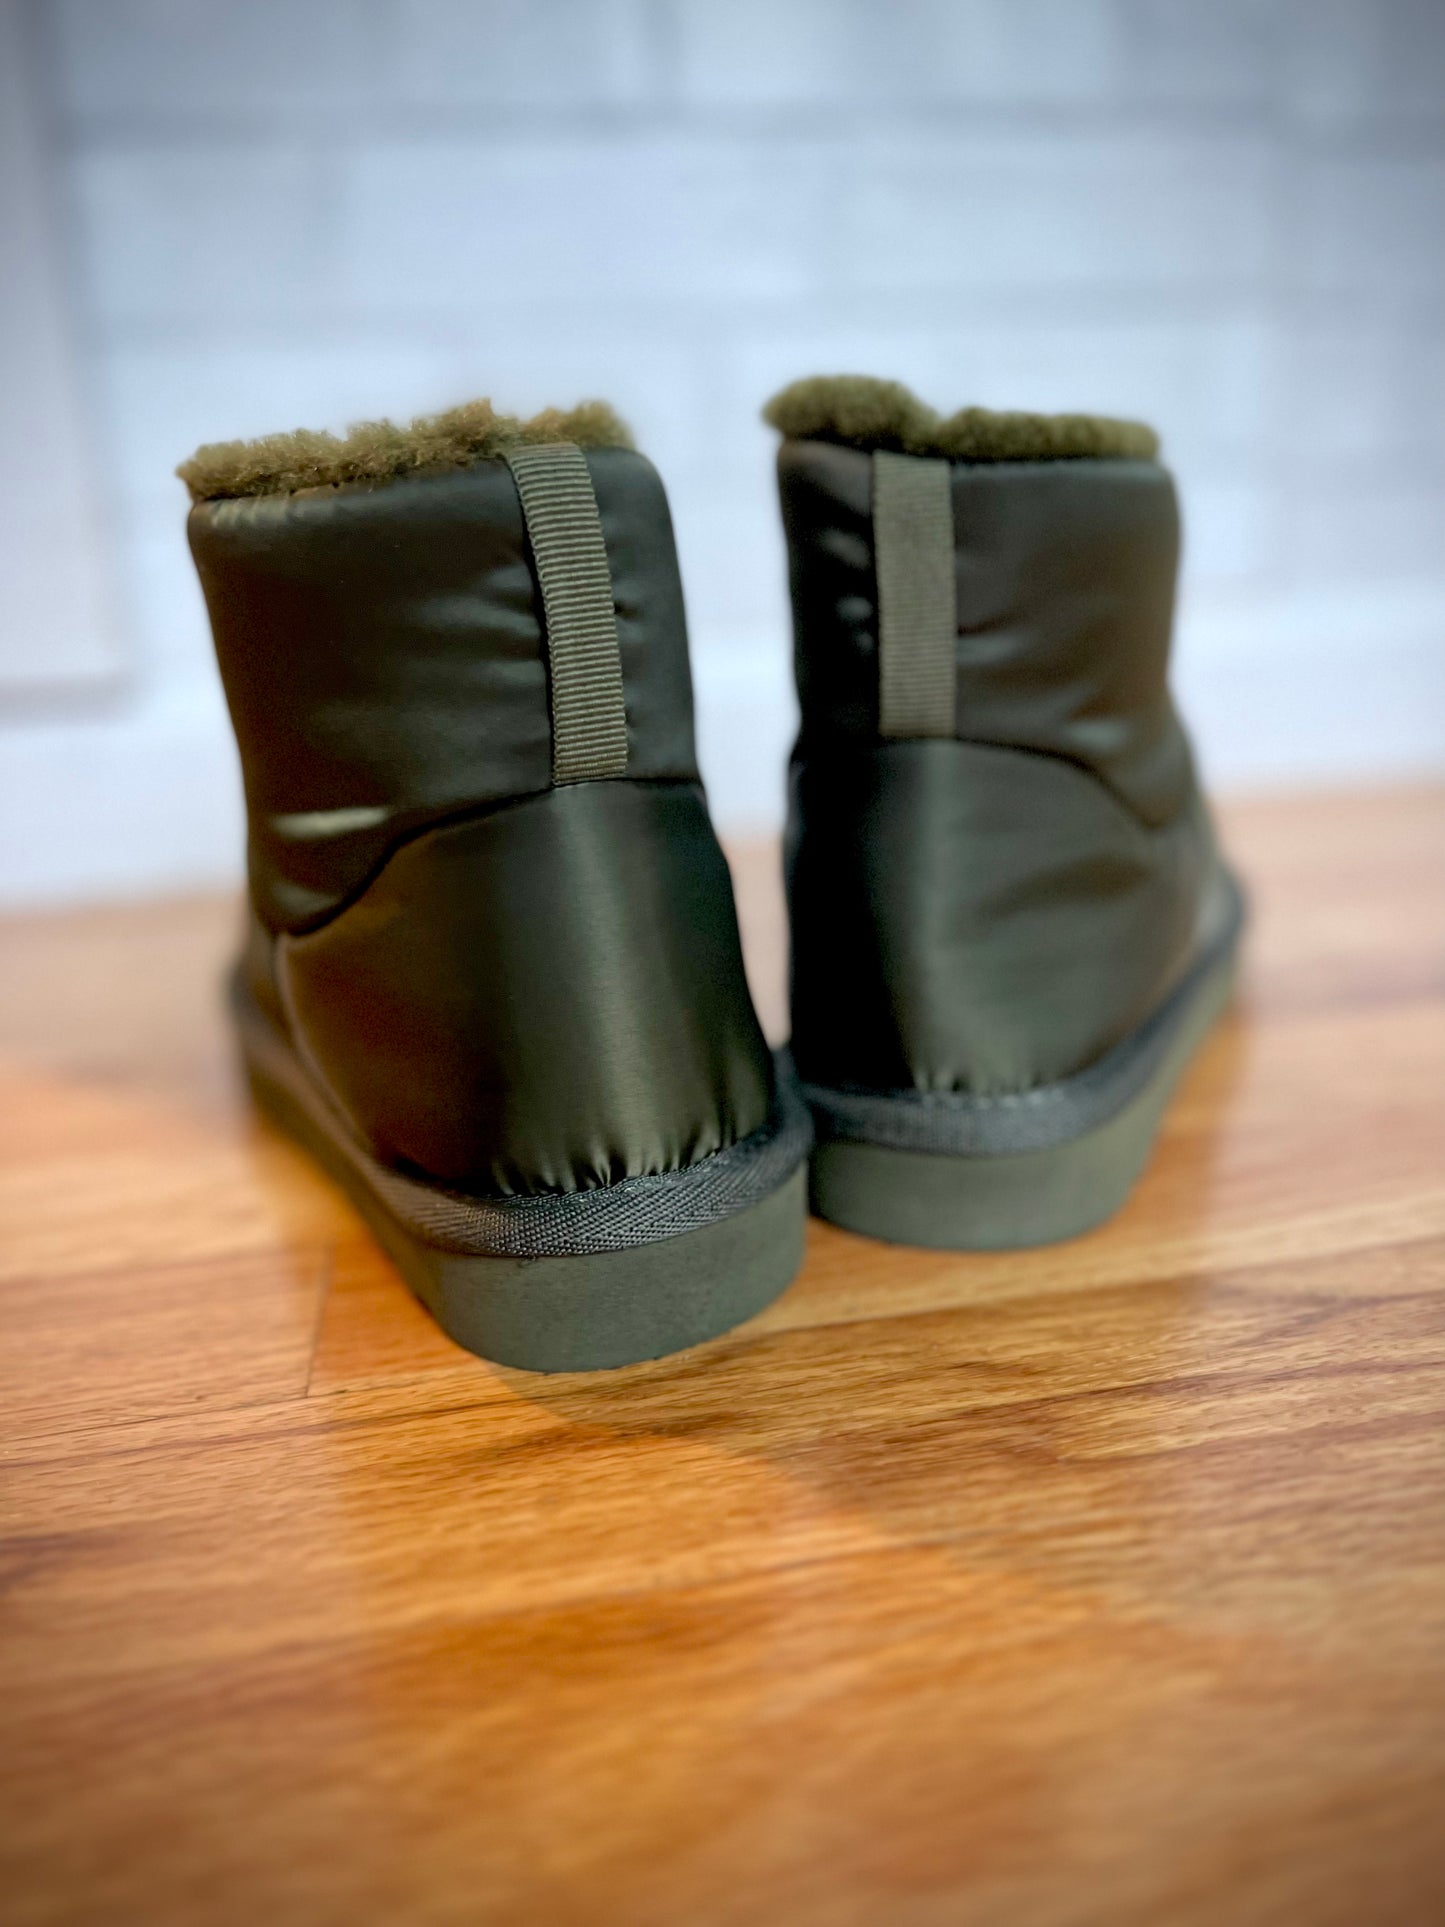 Vail Boot - Olive